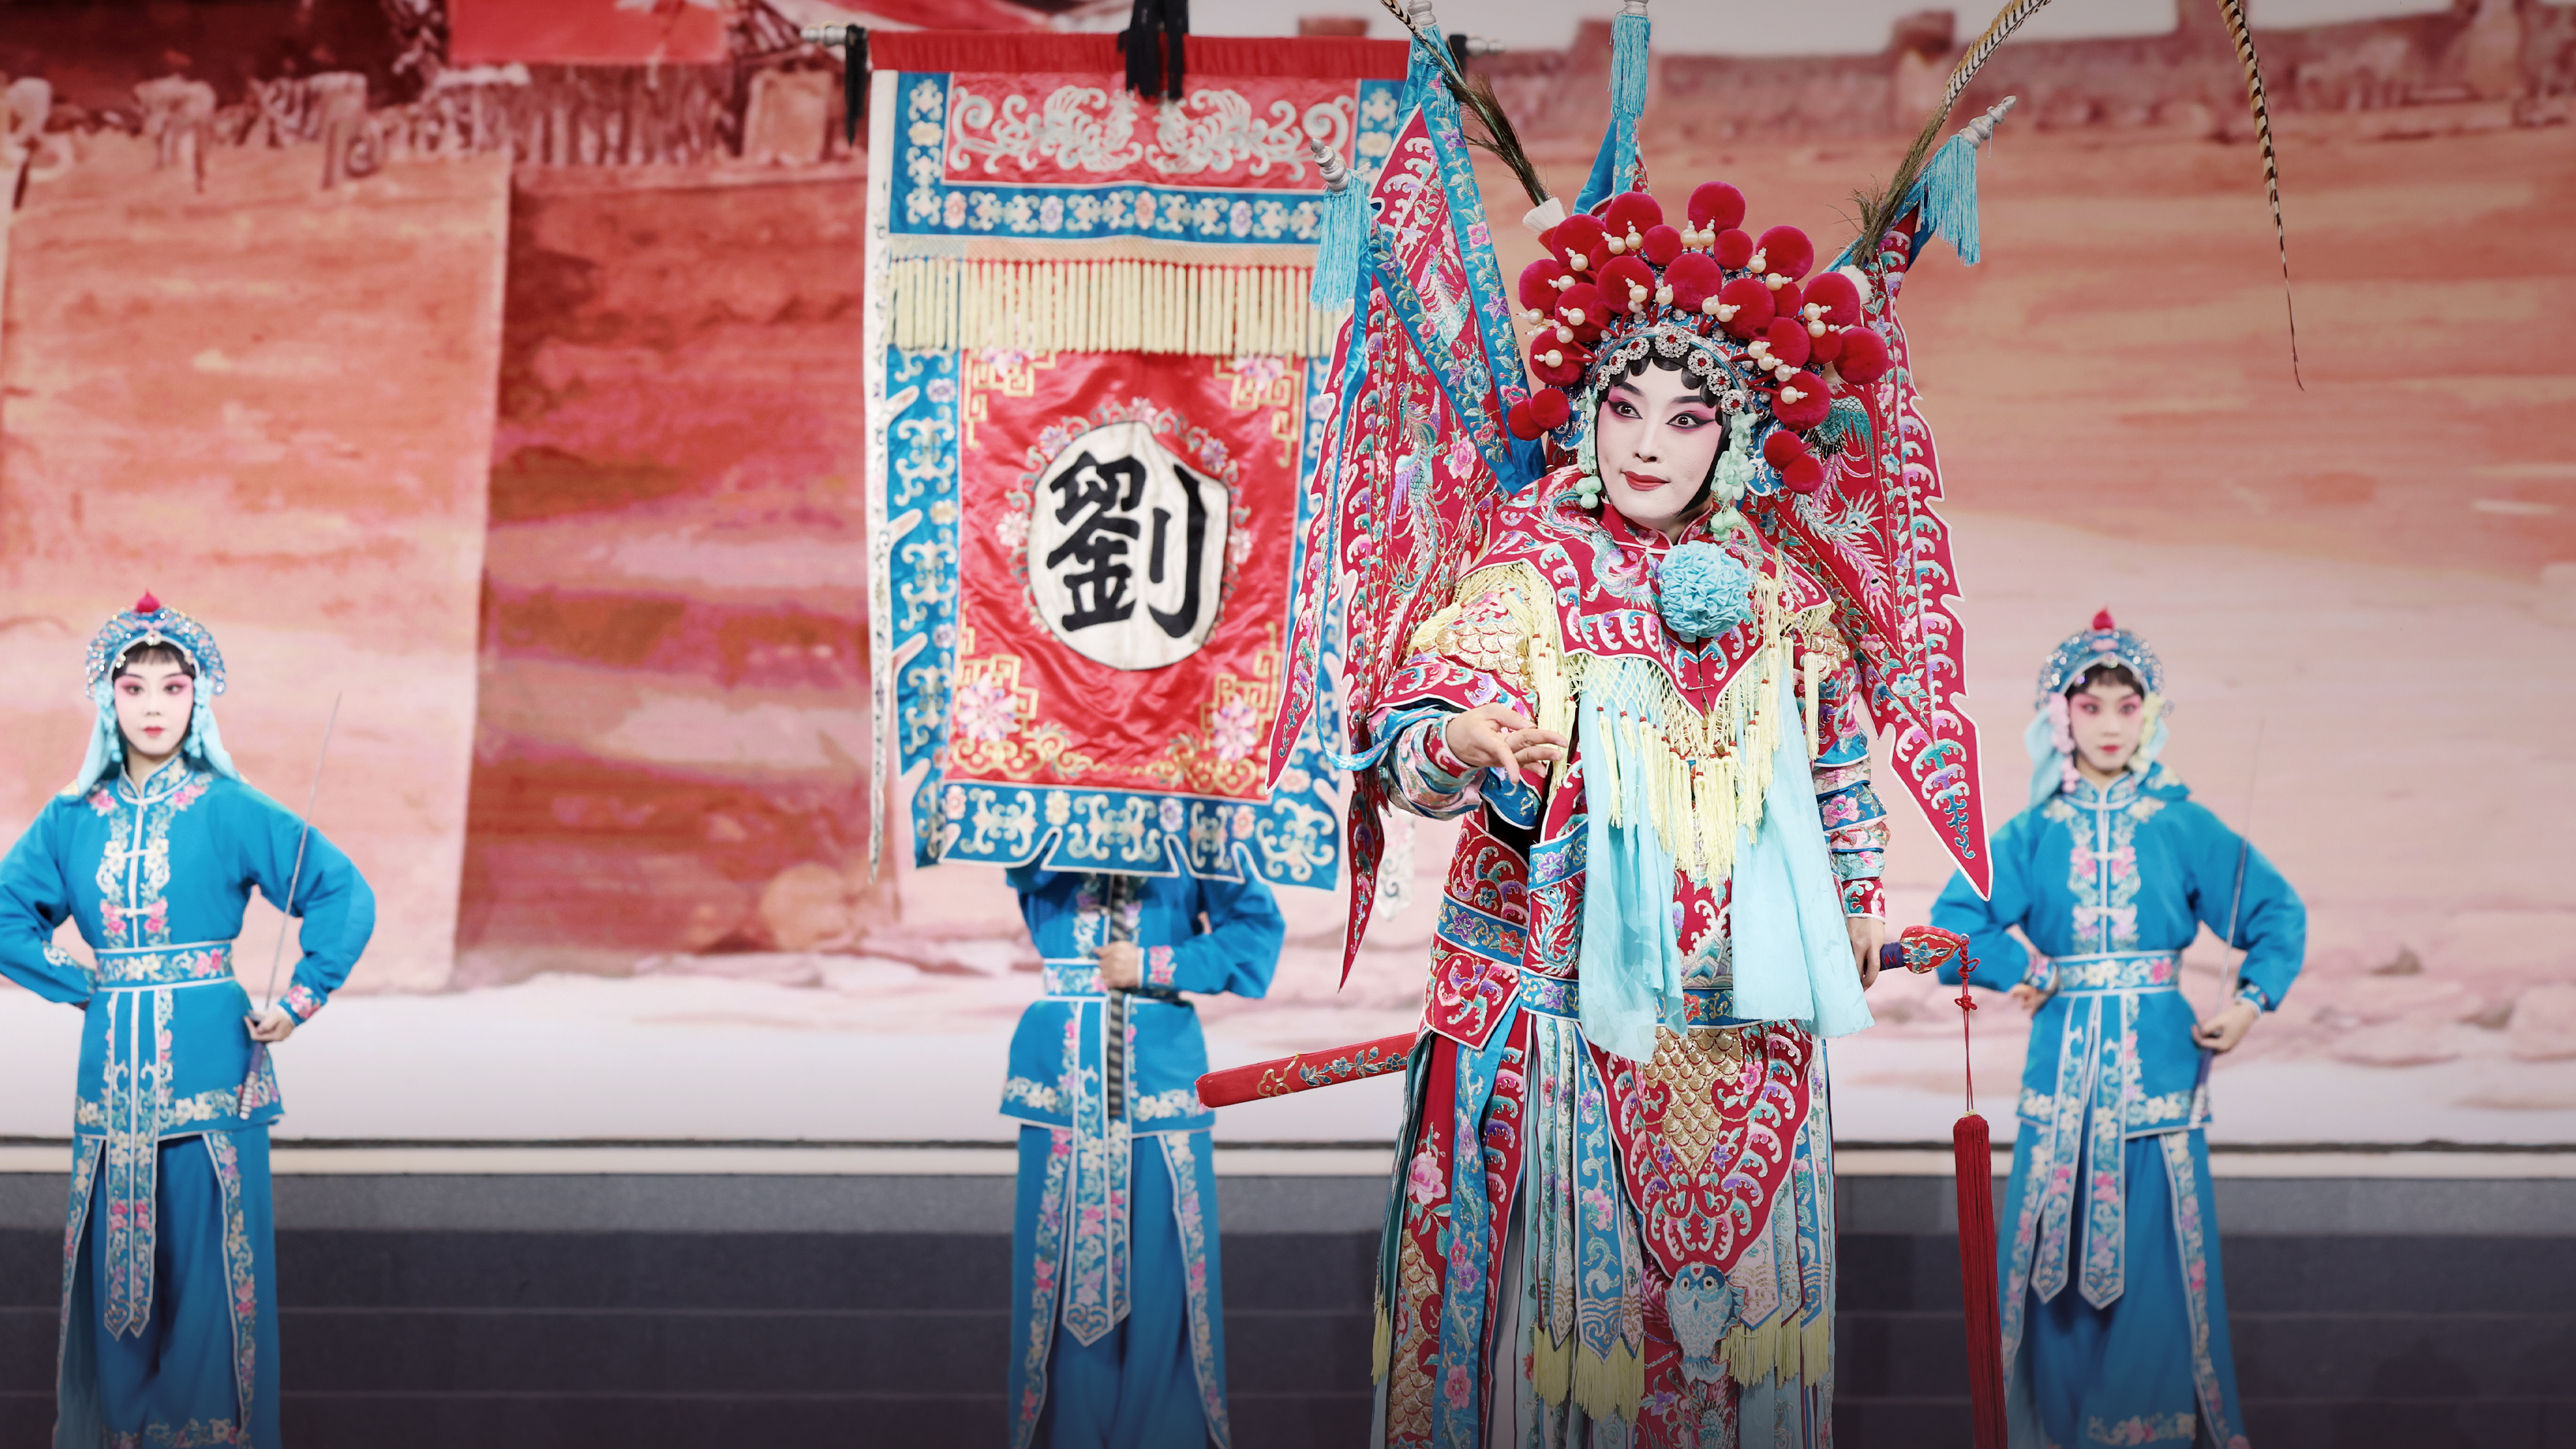 Young Peking Opera talents perform on stage in Beijing, China, in this undated photo. /Photo provided to CGTN